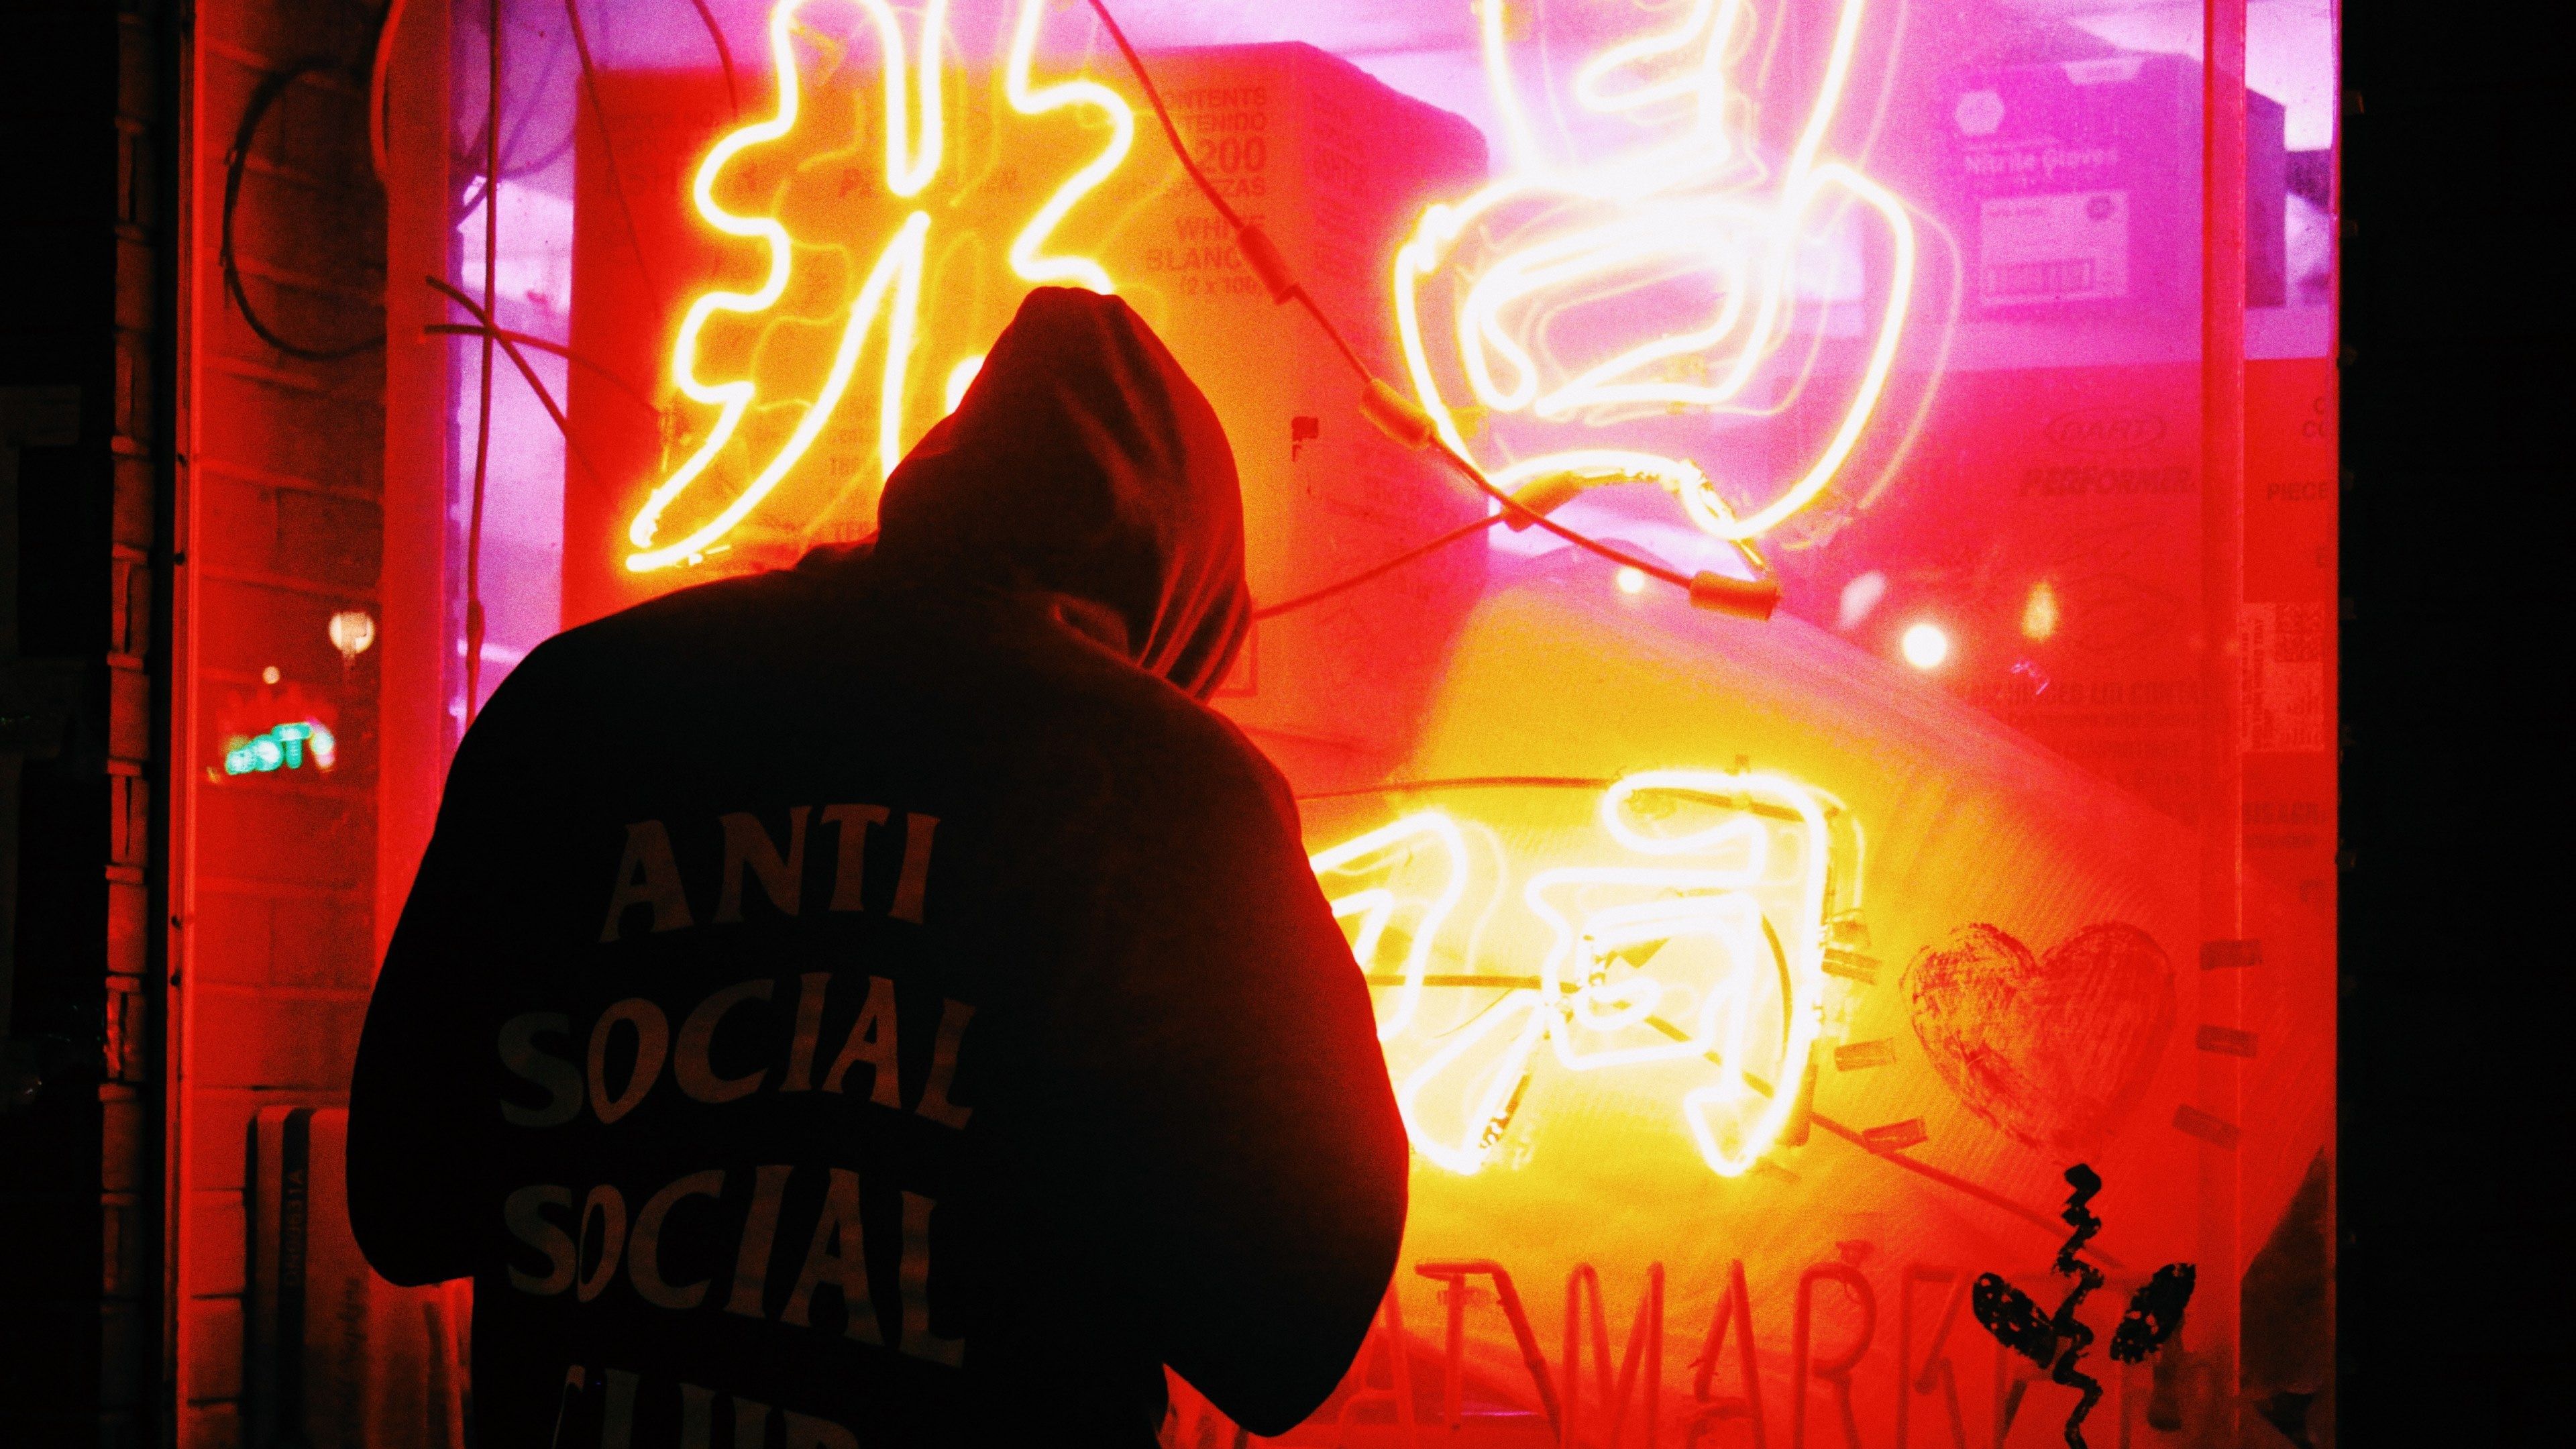 Wallpaper / man in hoody with anti social slogan standing outside red neon display in store window, man red neon window display 4k wallpaper free download